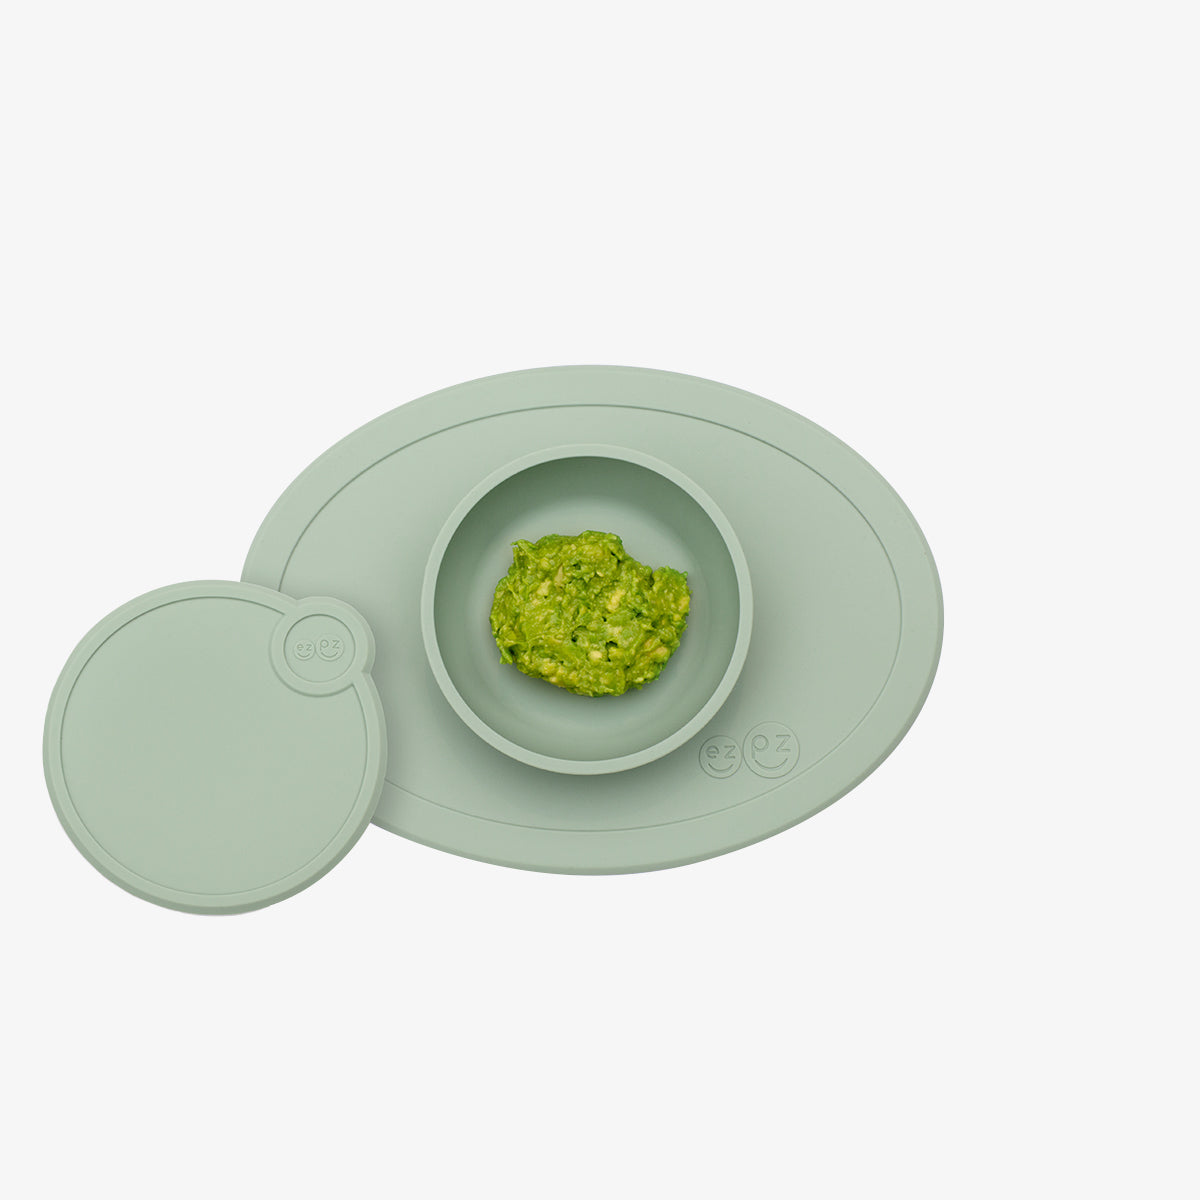 Tiny Bowl Lid in Sage / Storage Lids for the Tiny Bowl by ezpz / Silicone Lid for Baby Bowl